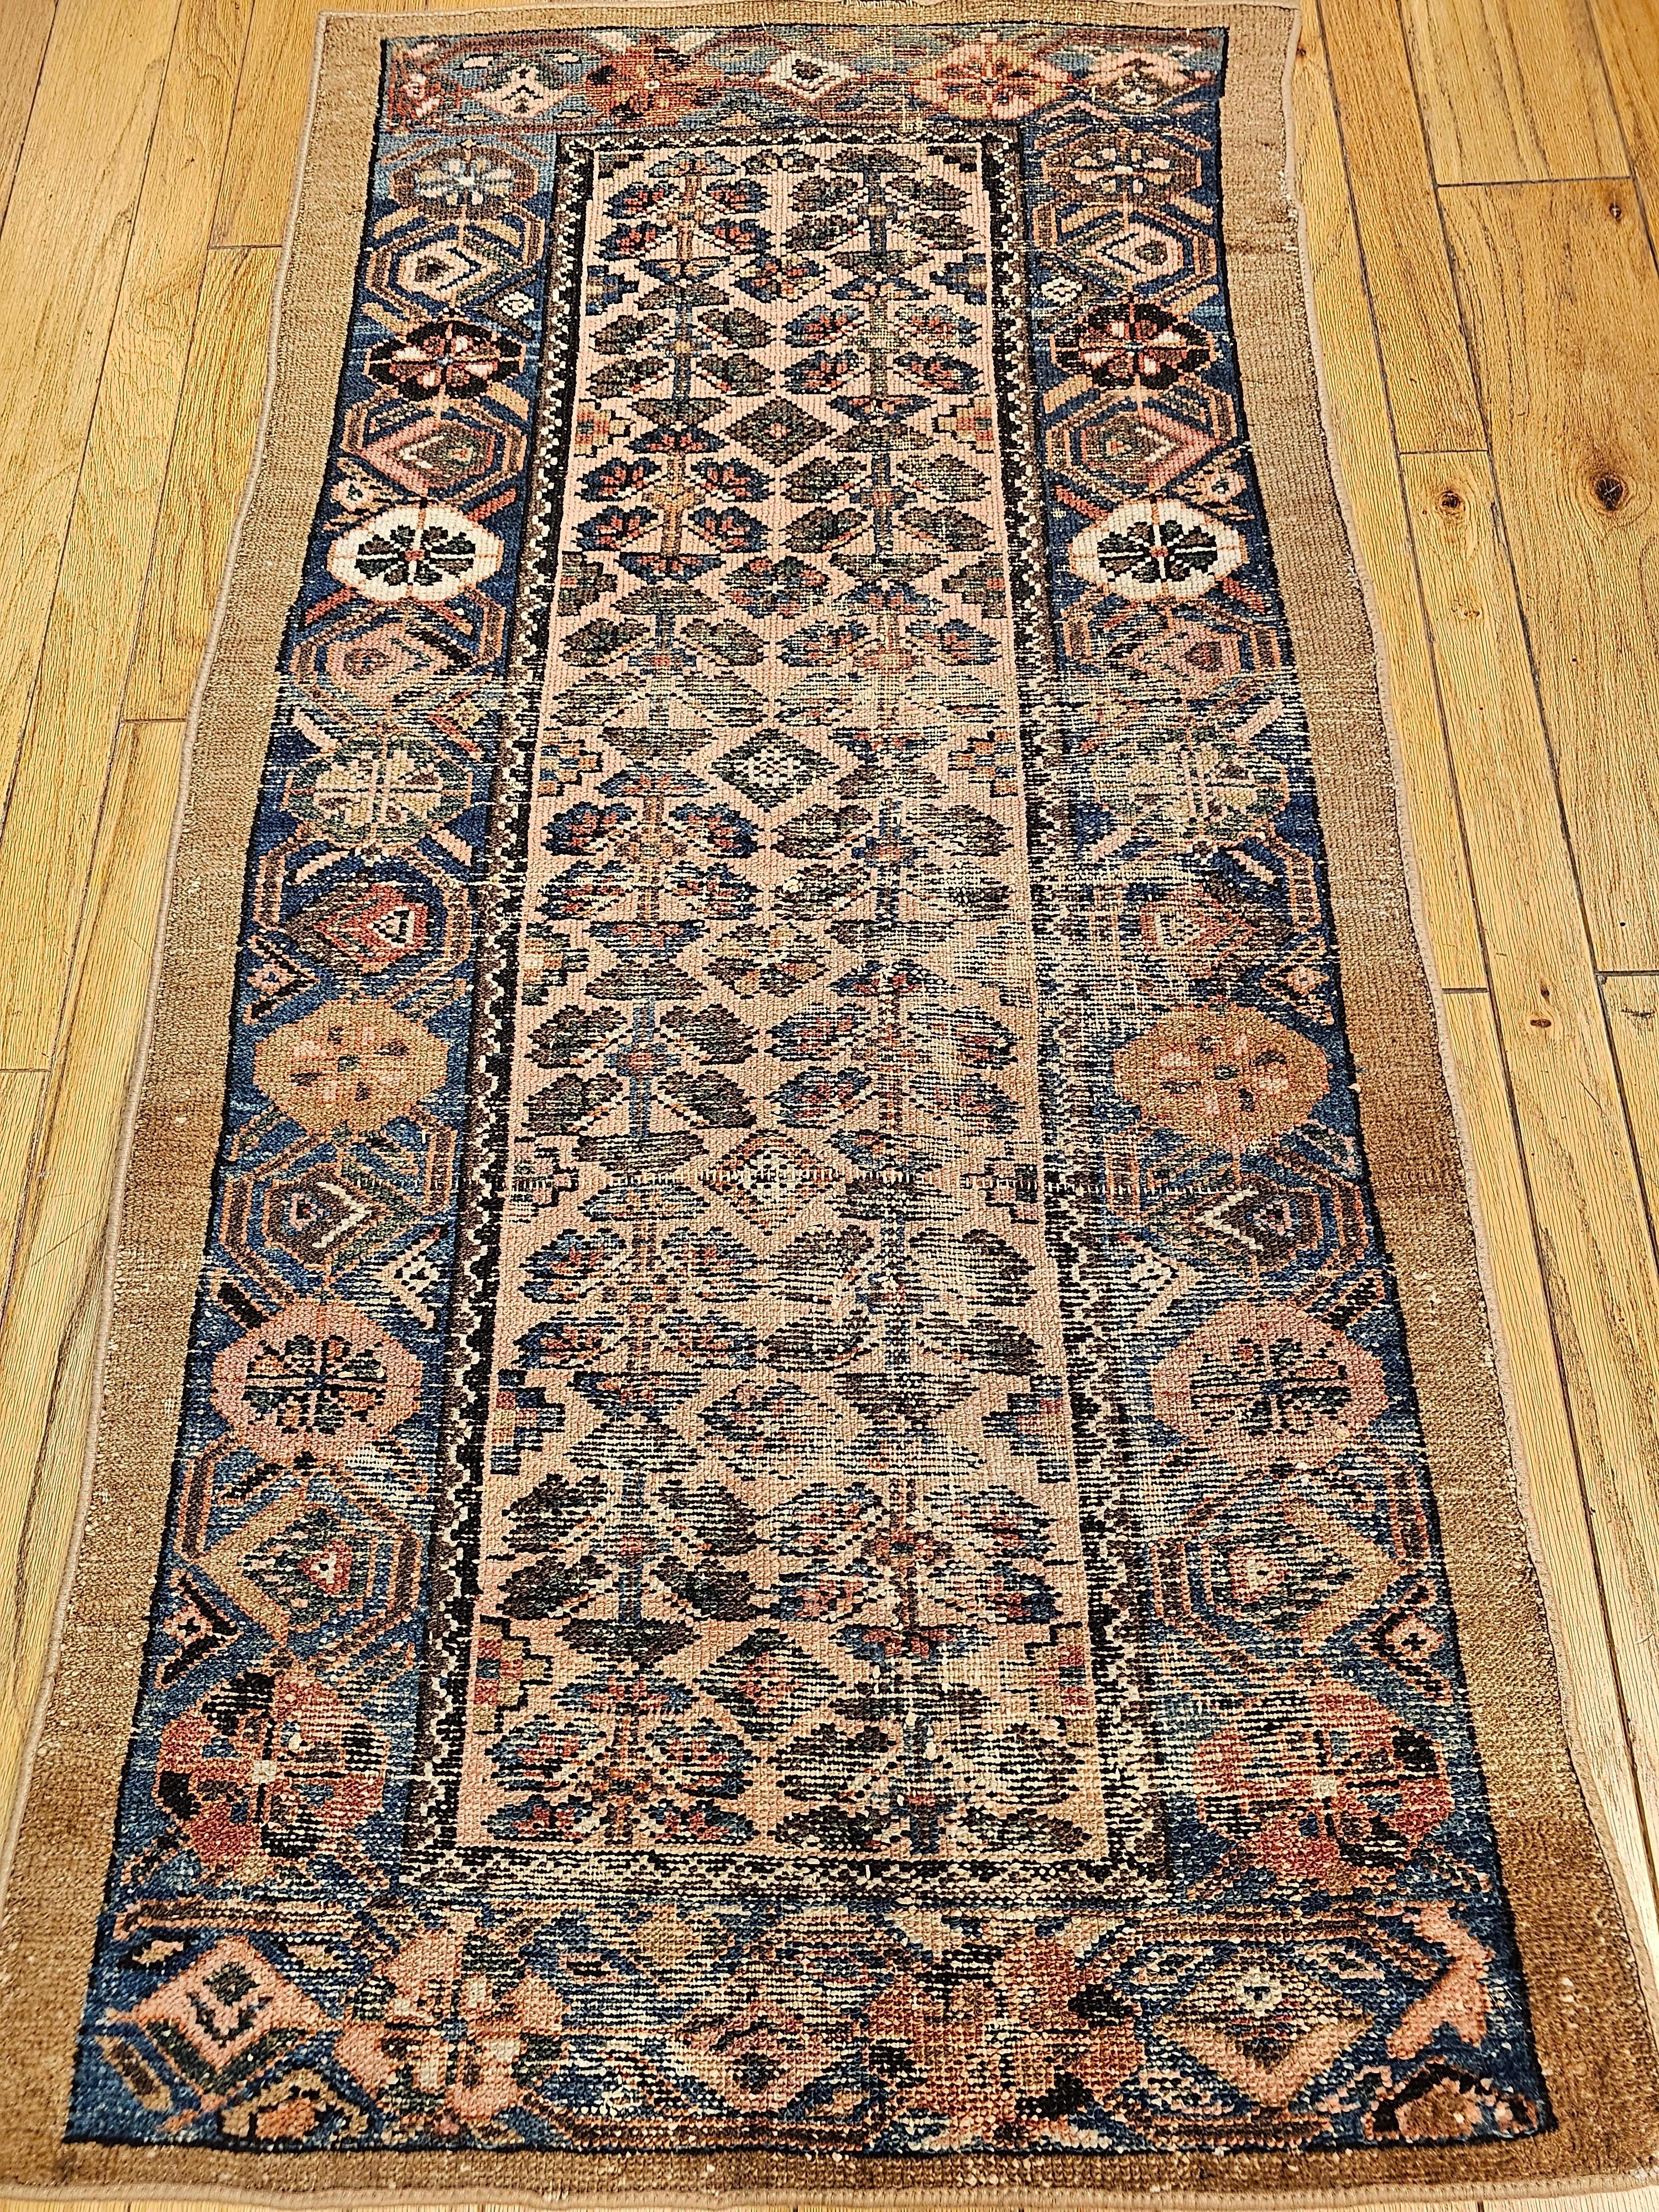 Vintage Persian Malayer Area Rug in Allover Geometric Design from the early 1900s.  The Persian Malayer has an extremely desirable  “allover geometric” design set on a pale pink background.  The rug has a beautiful border in an abrash French blue